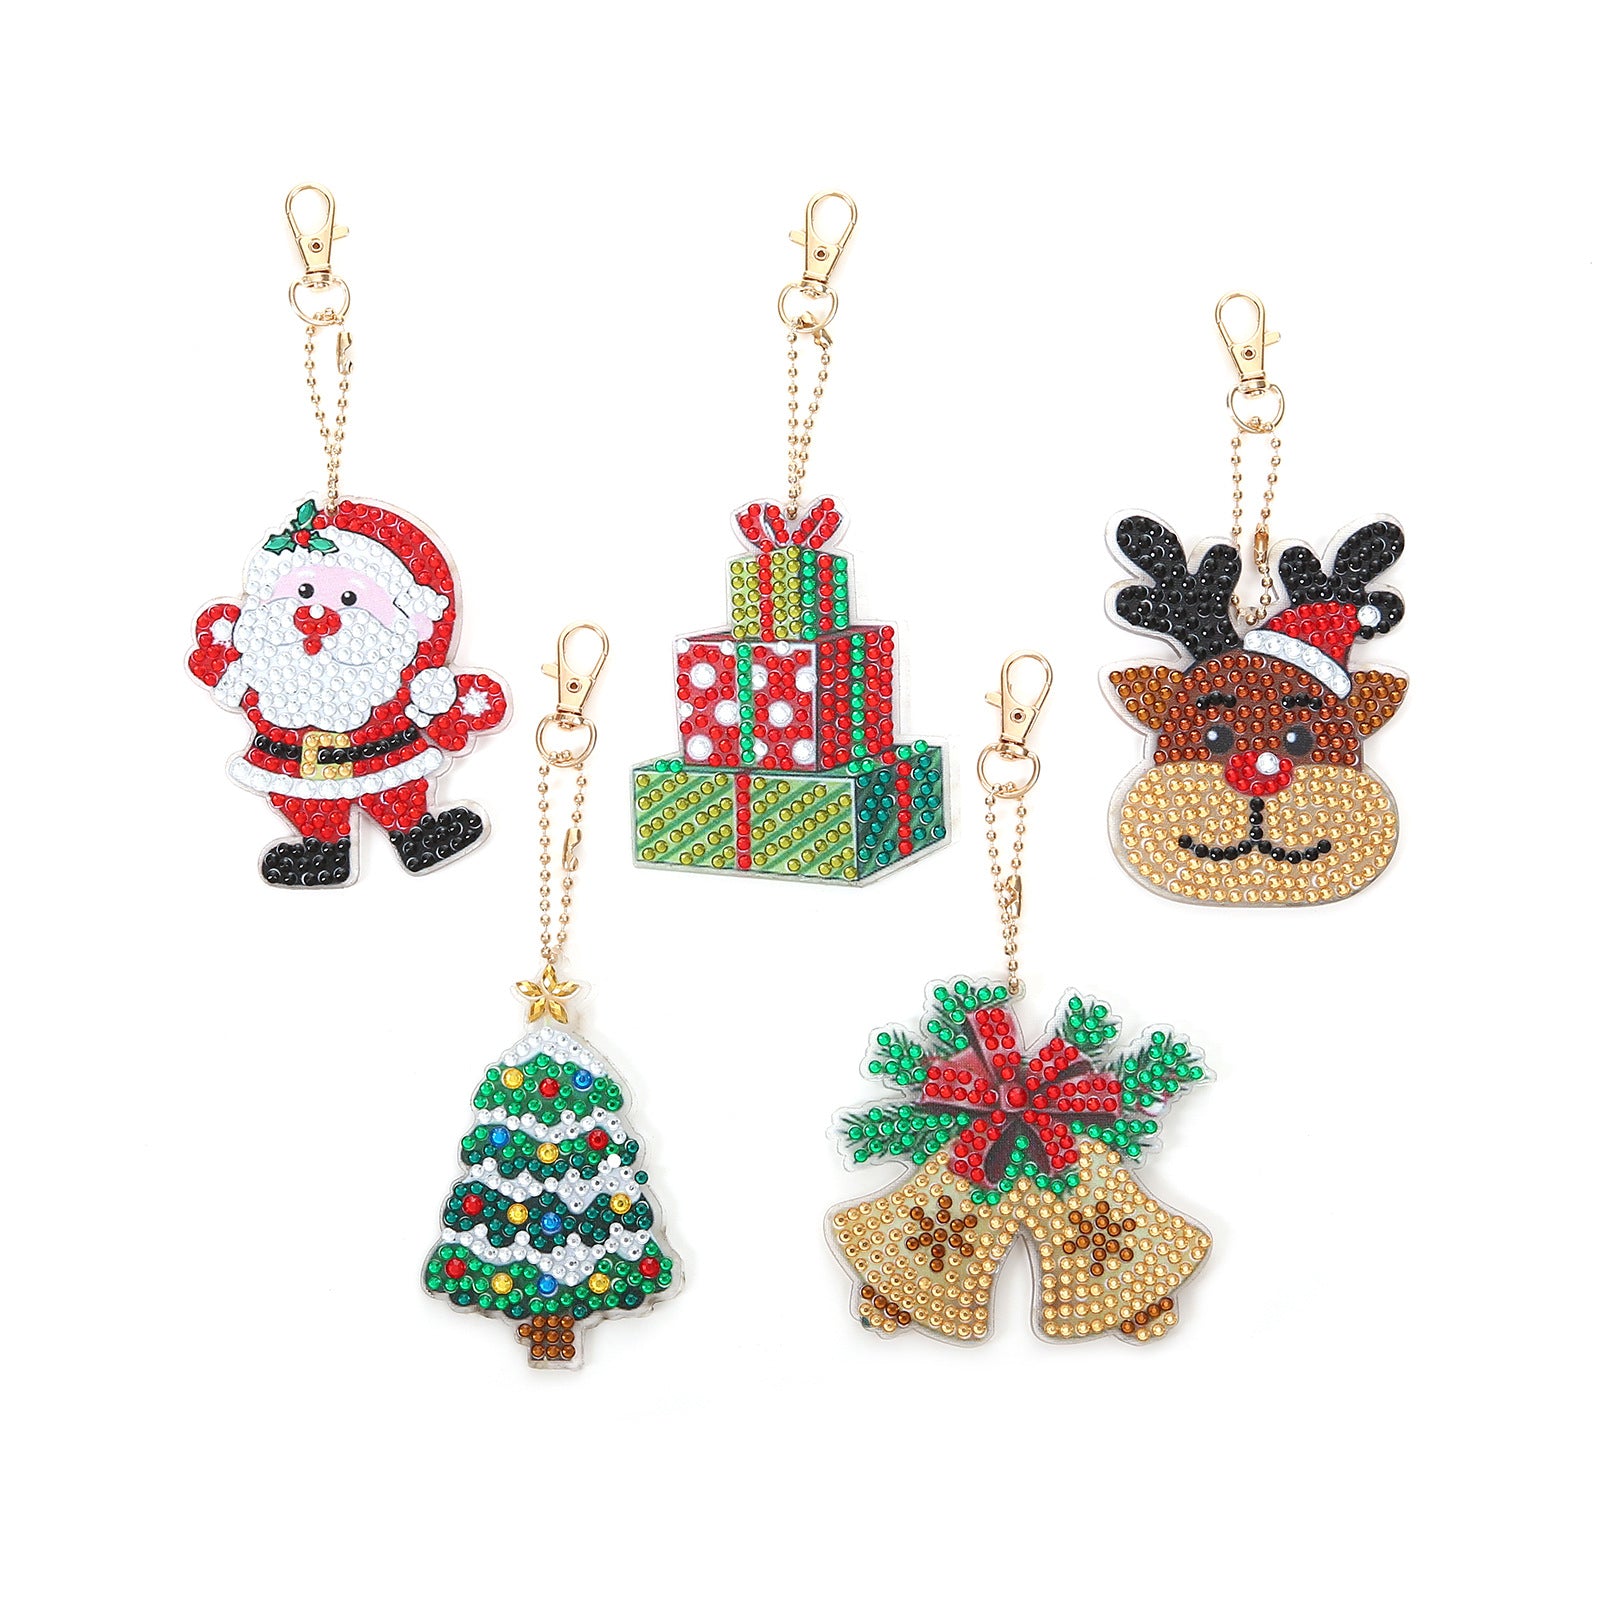 Full Diamond Christmas Keychain Outdoor and Indoor Christmas decorations Items, Christmas ornaments, Christmas tree decorations, salt dough ornaments, Christmas window decorations, cheap Christmas decorations, snowmen, and ornaments.